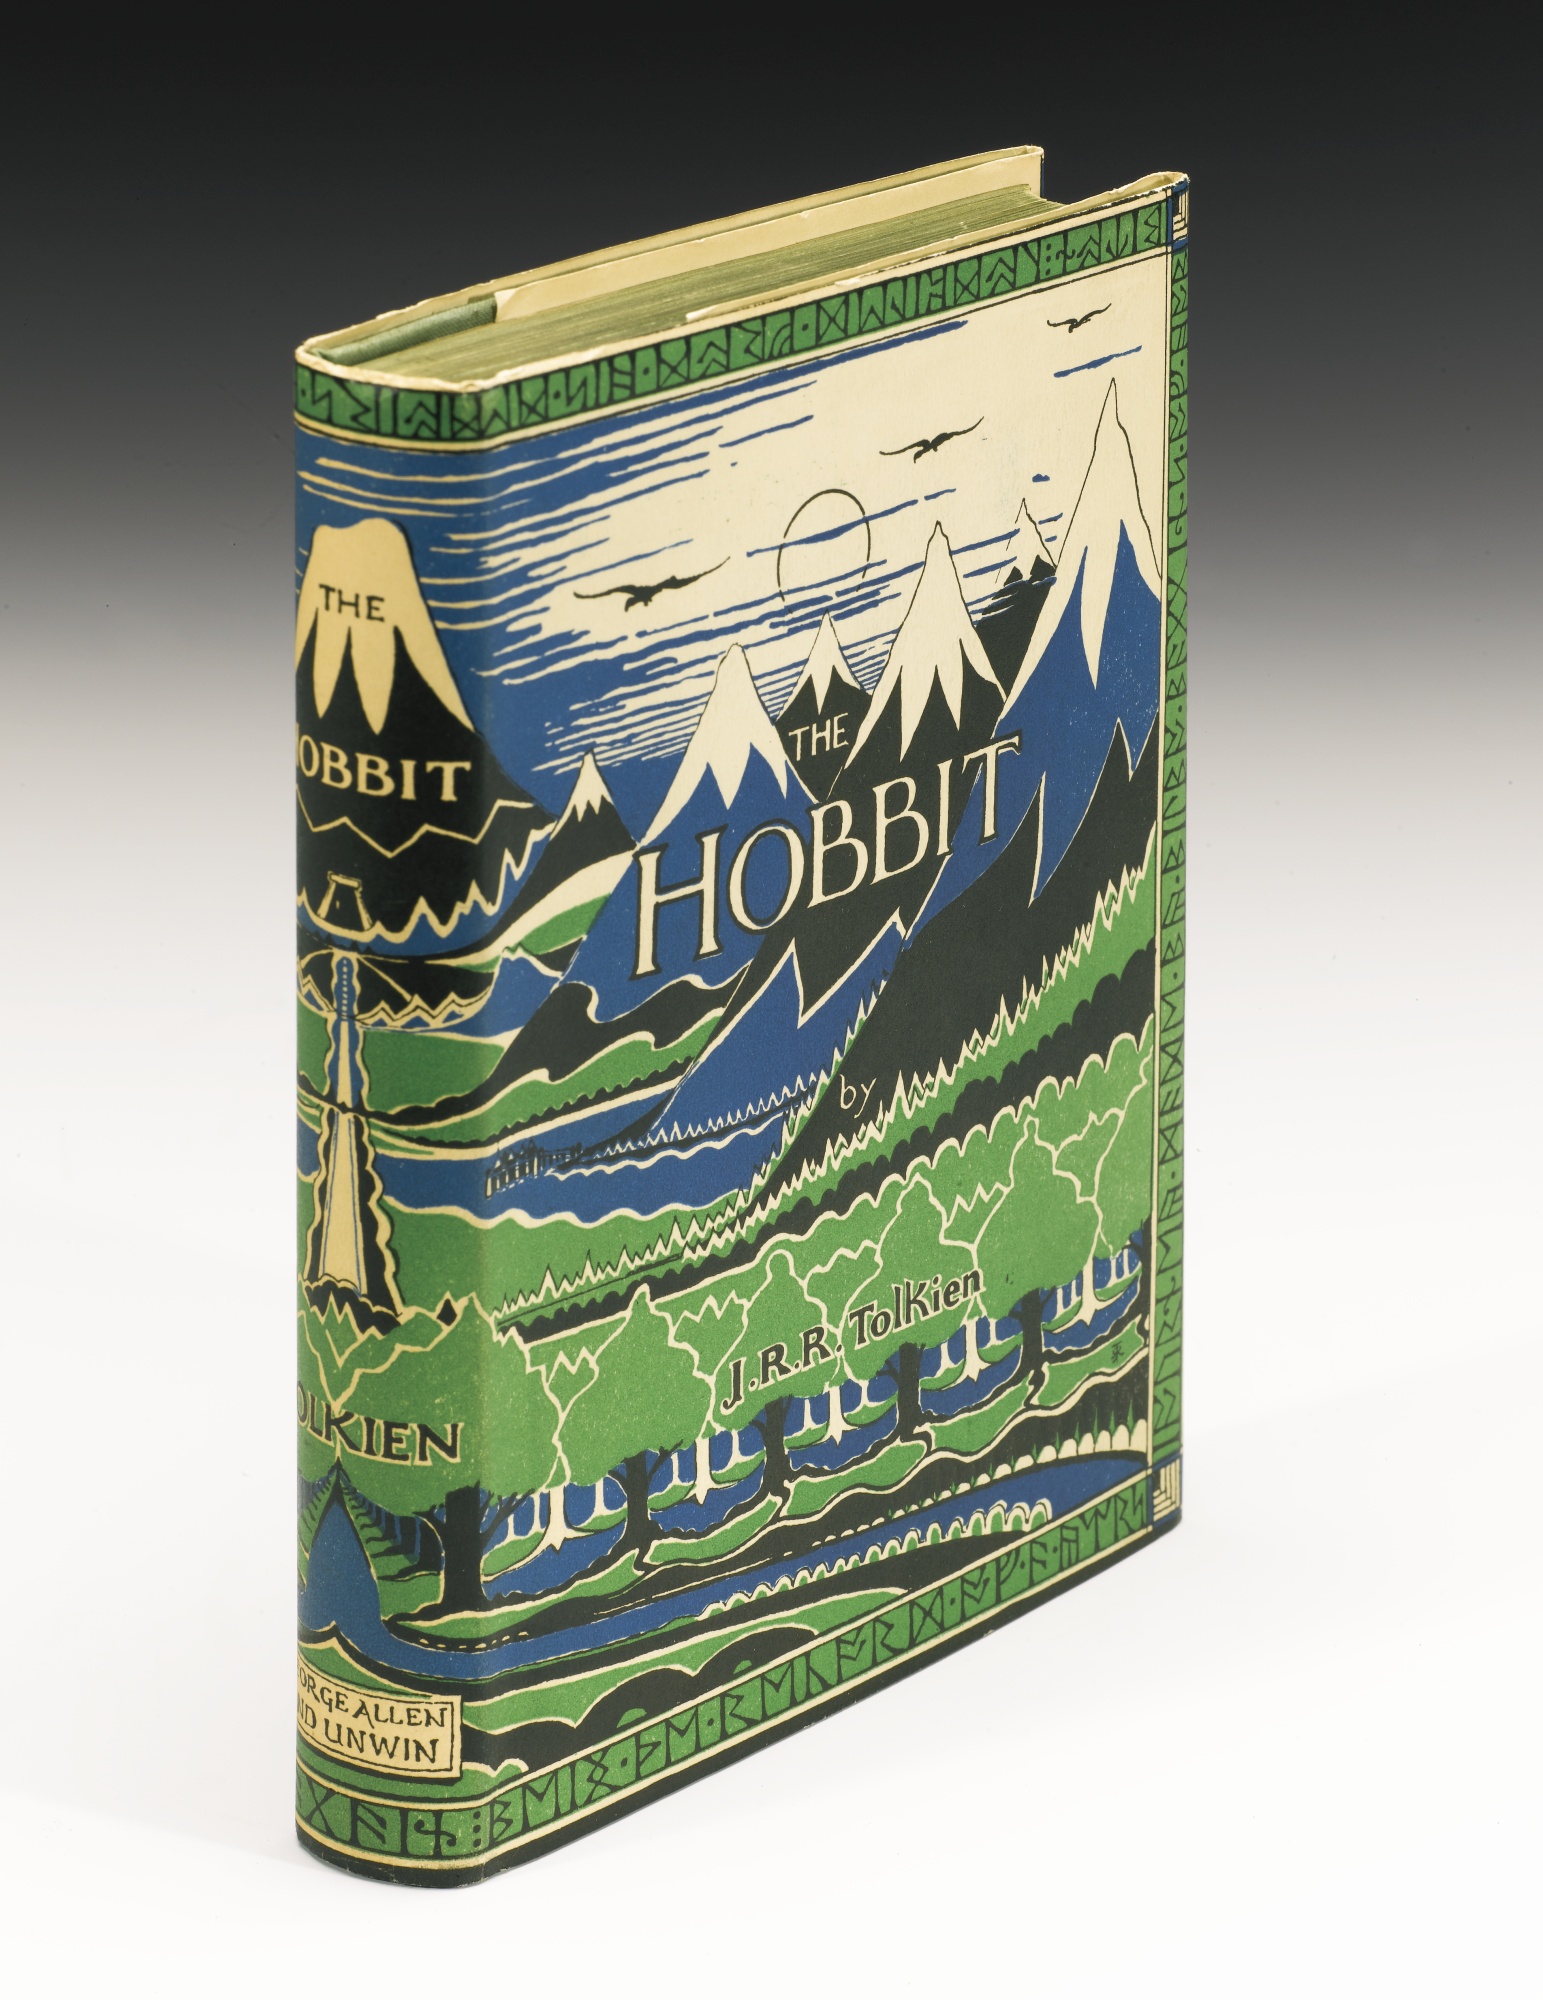 most expensive copy of the hobbit in the world